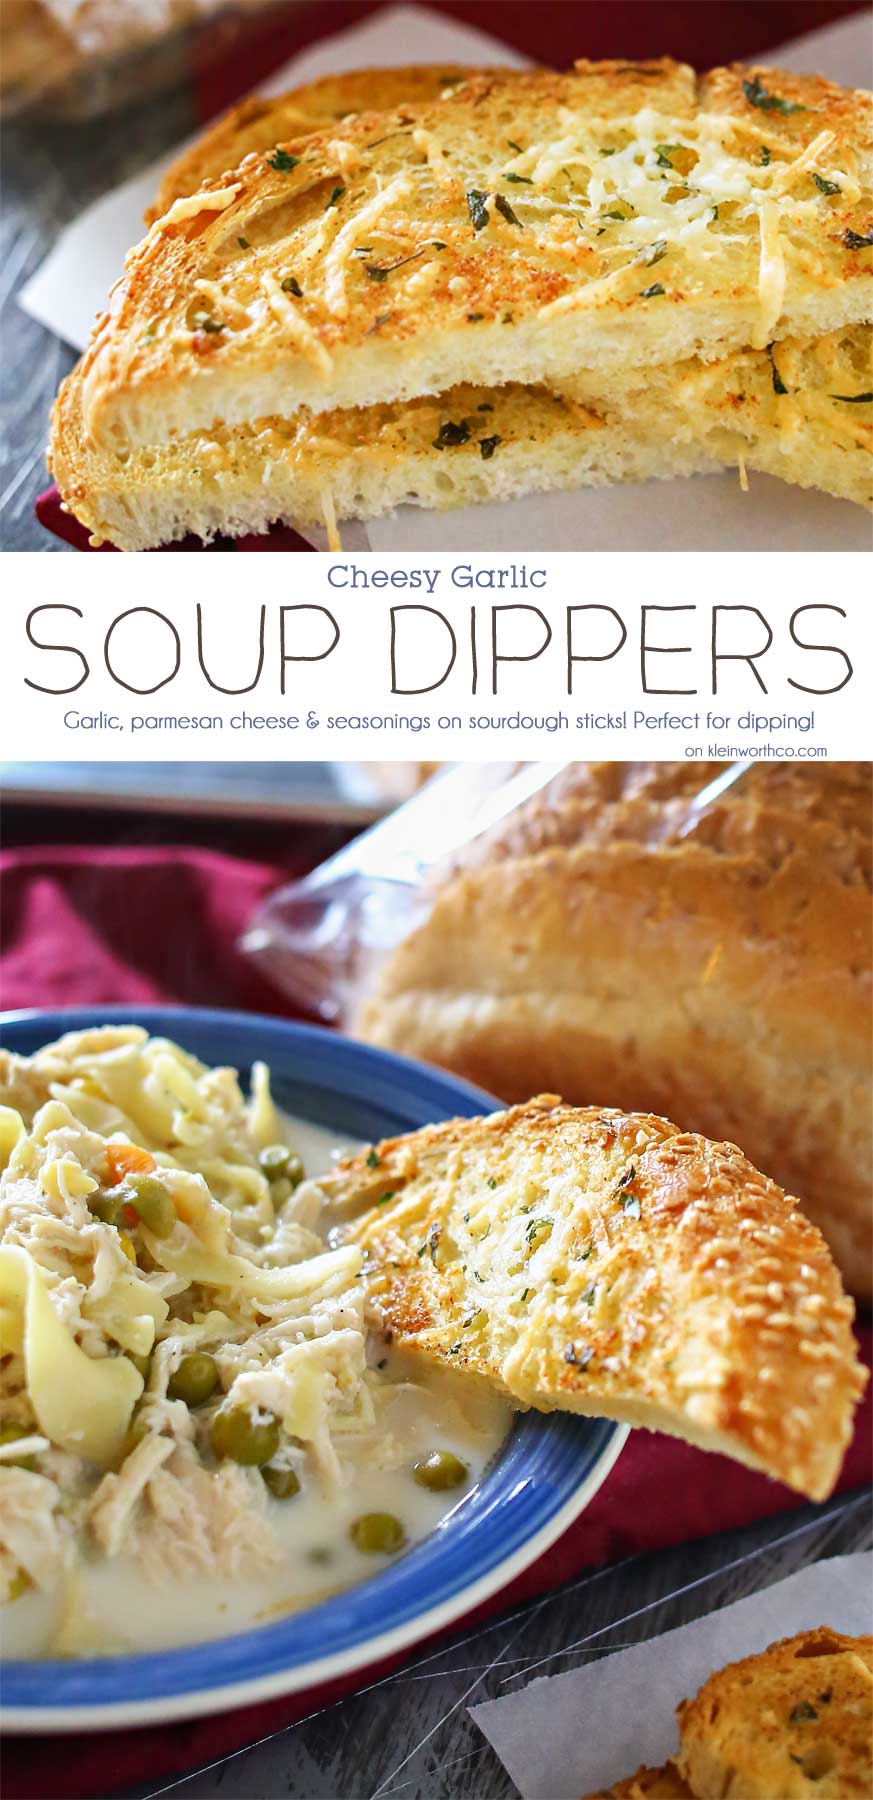 Cheesy Garlic Soup Dippers are broiled sourdough bread sticks loaded with butter, seasonings & Parmesan cheese. Better than croutons & absolutely perfect w/ any soup recipe. All that crunchy, cheesy, garlicky, sourdough goodness- YUM! 